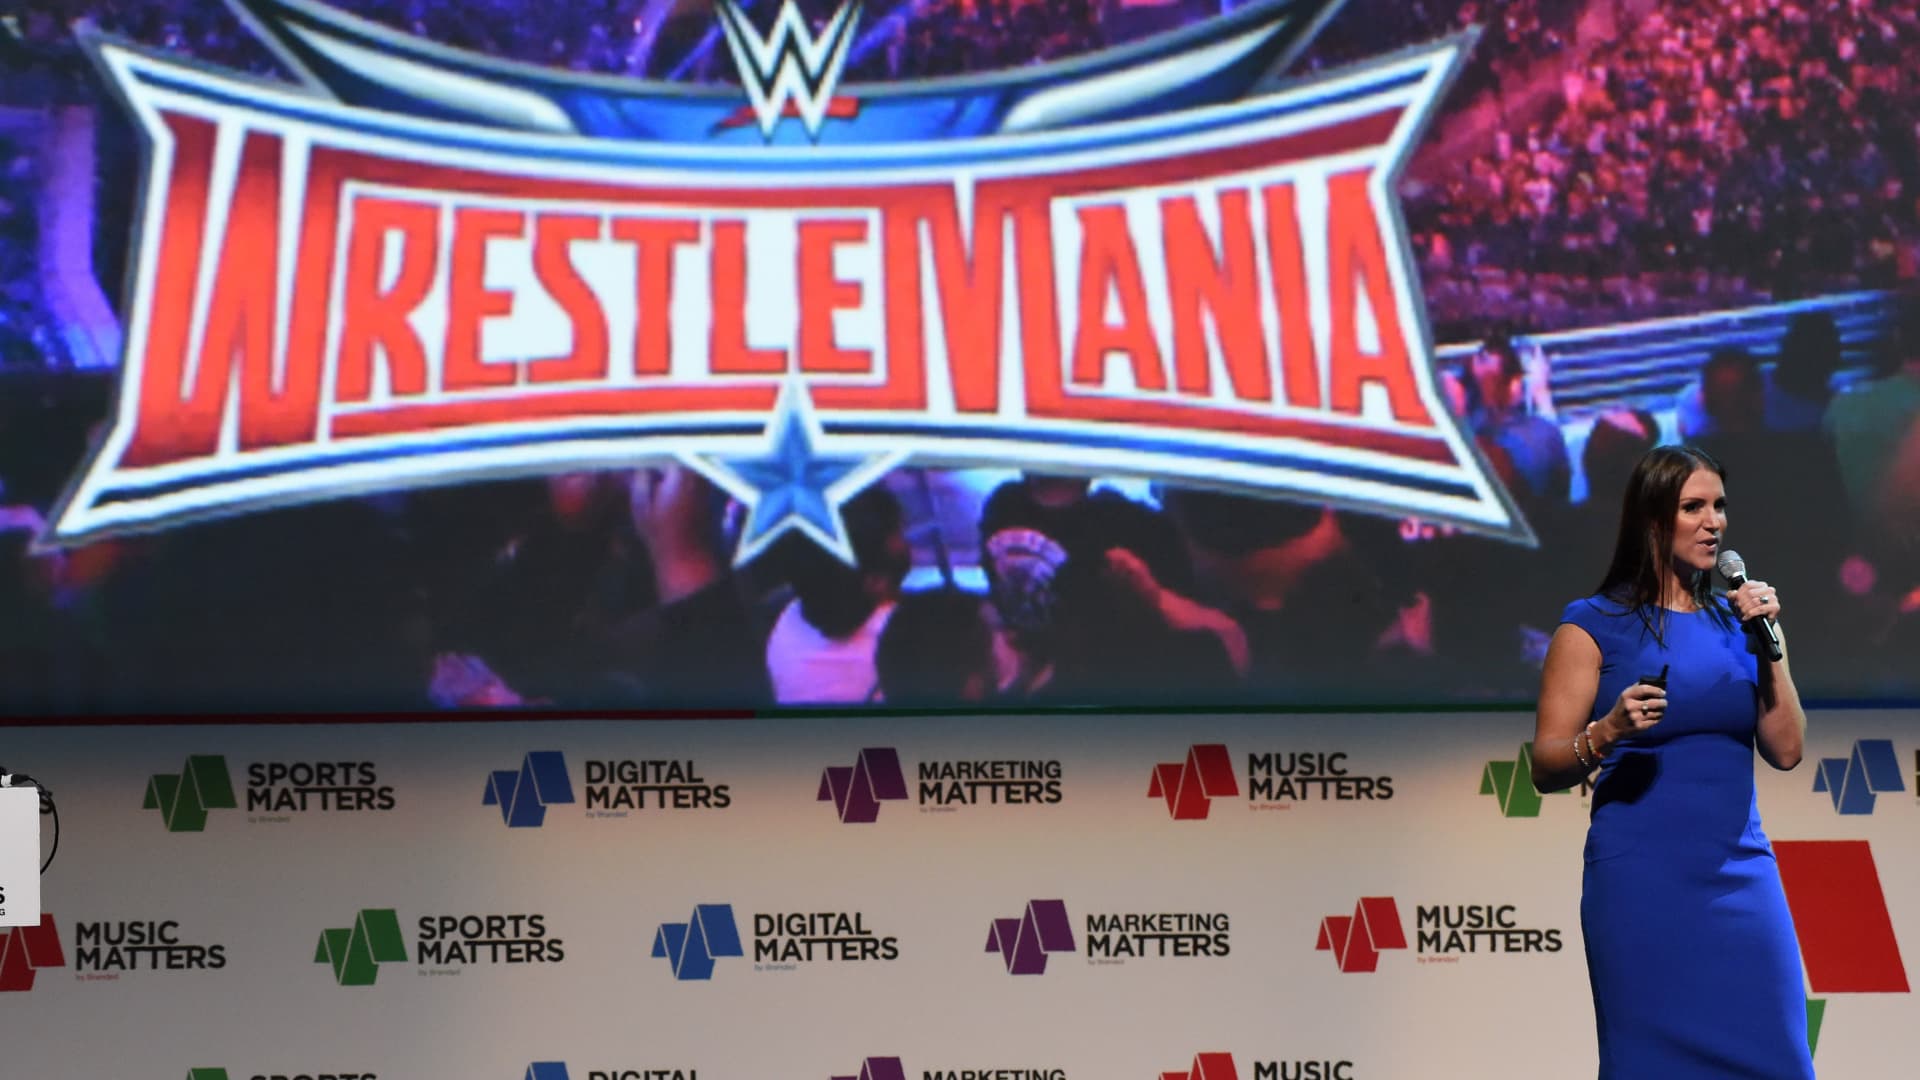 WWE looks to boost its sponsorship revenue as live events return and a key media deal expires